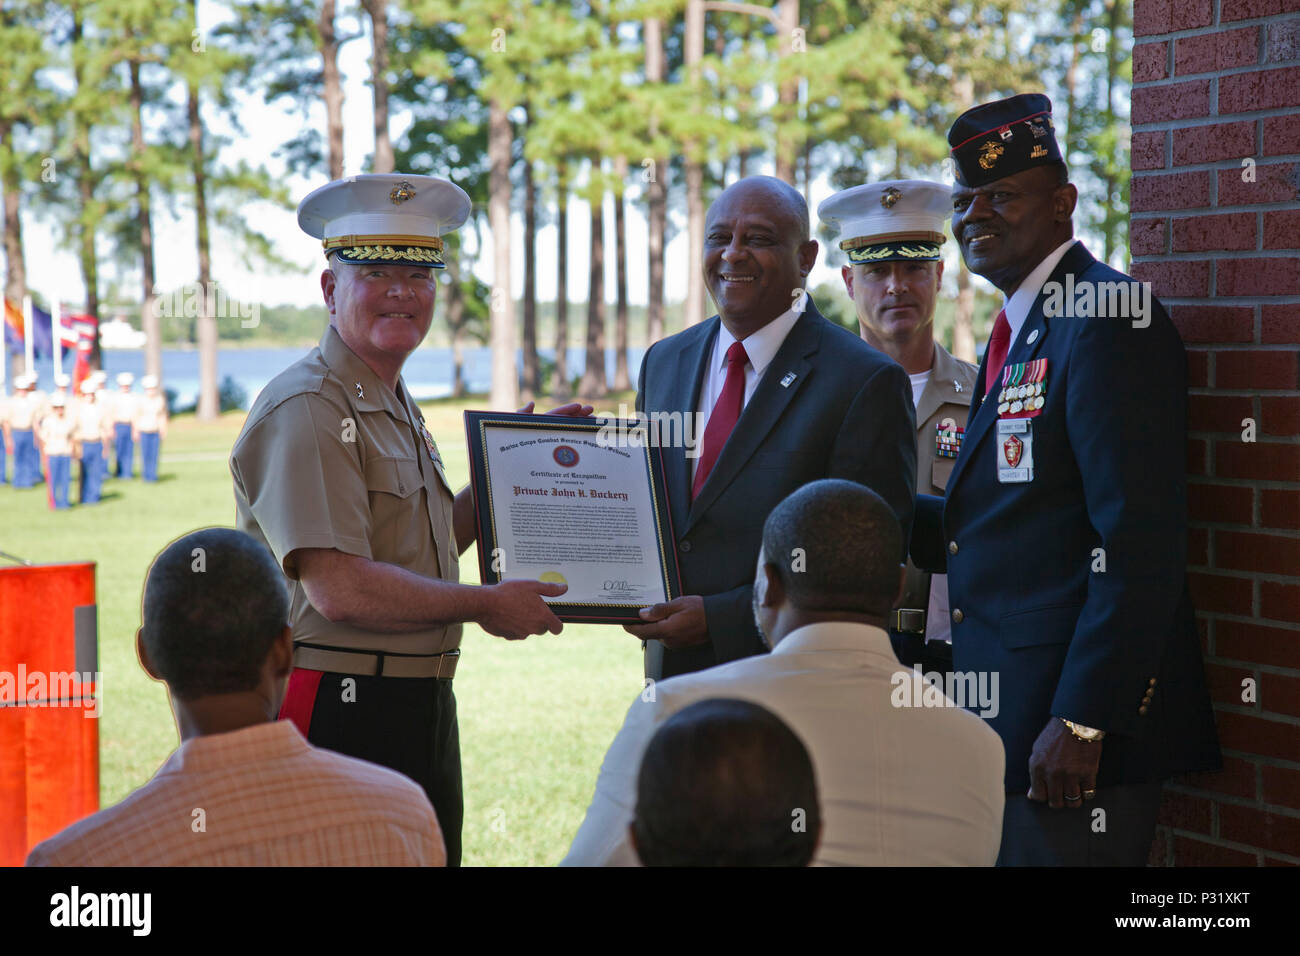 U.S. Marine Corps Maj. Gen. Walter L. Miller, Jr., commanding general of II Marine Expeditionary Force, far left, presents a certificate of recognition to retired. Lt. Col. John C. Dockery on behalf of Pvt. John H. Dockery during the Montford Point Marines'Day ceremony held at Camp Johnson, N.C., August 25, 2016. The annual ceremony was held aboard Camp Johnson to celebrate the legacy of the original Montford Point Marines and the impact they had on the Marine Corps both past and present. (U.S. Marine Corps photo by Lance Cpl. Jose Villalobosrocha) Stock Photo